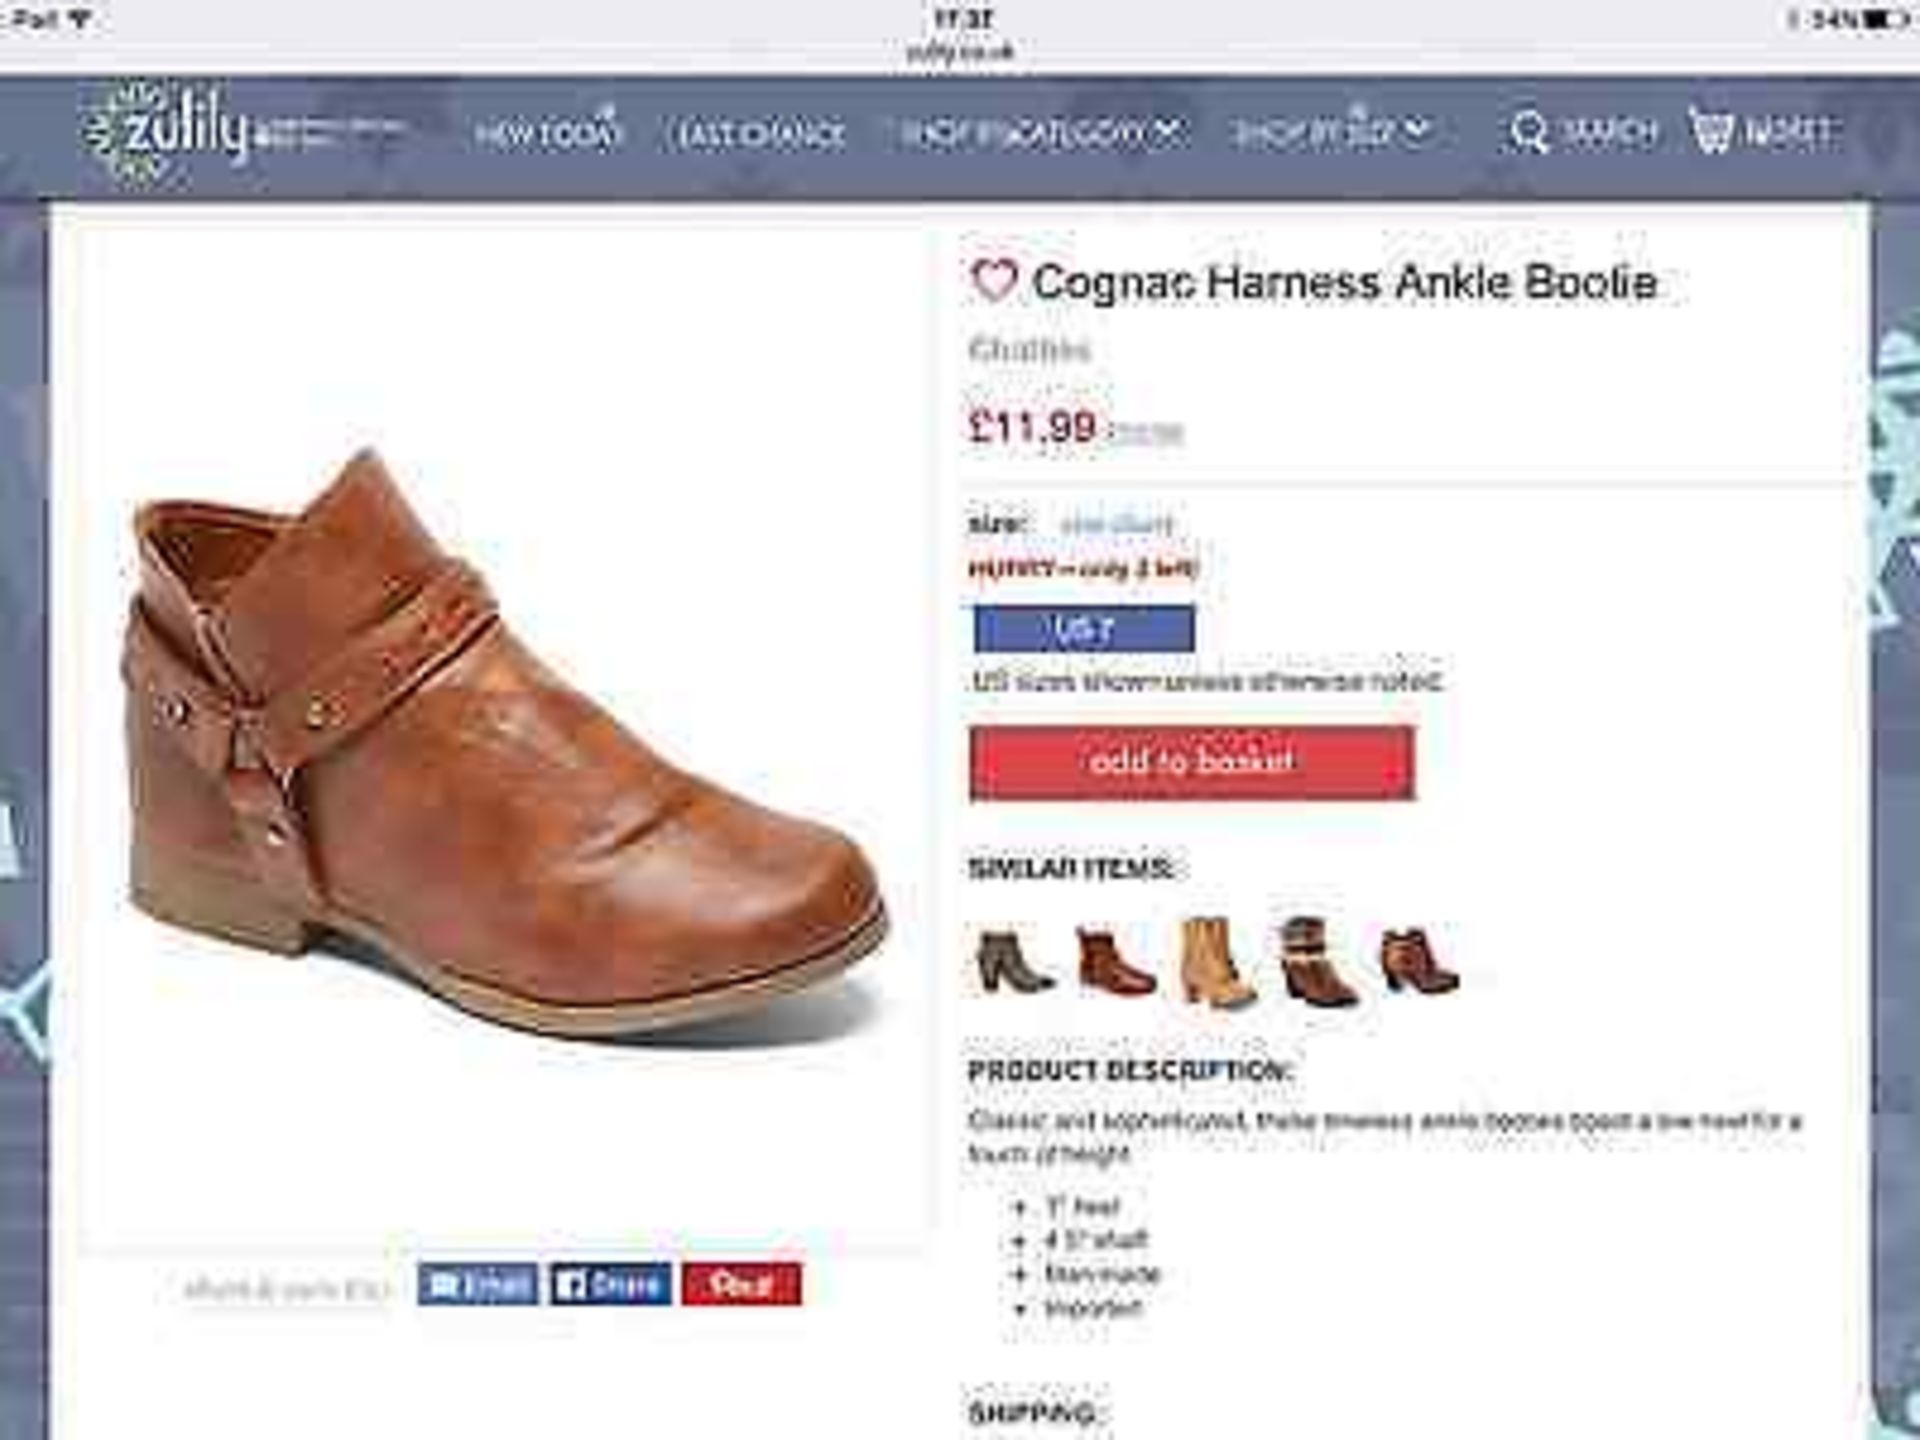 Chatties Cognac Harness Ankle Bootie, Size Eur 34, RRP £53.99 (New without box) - Image 3 of 4